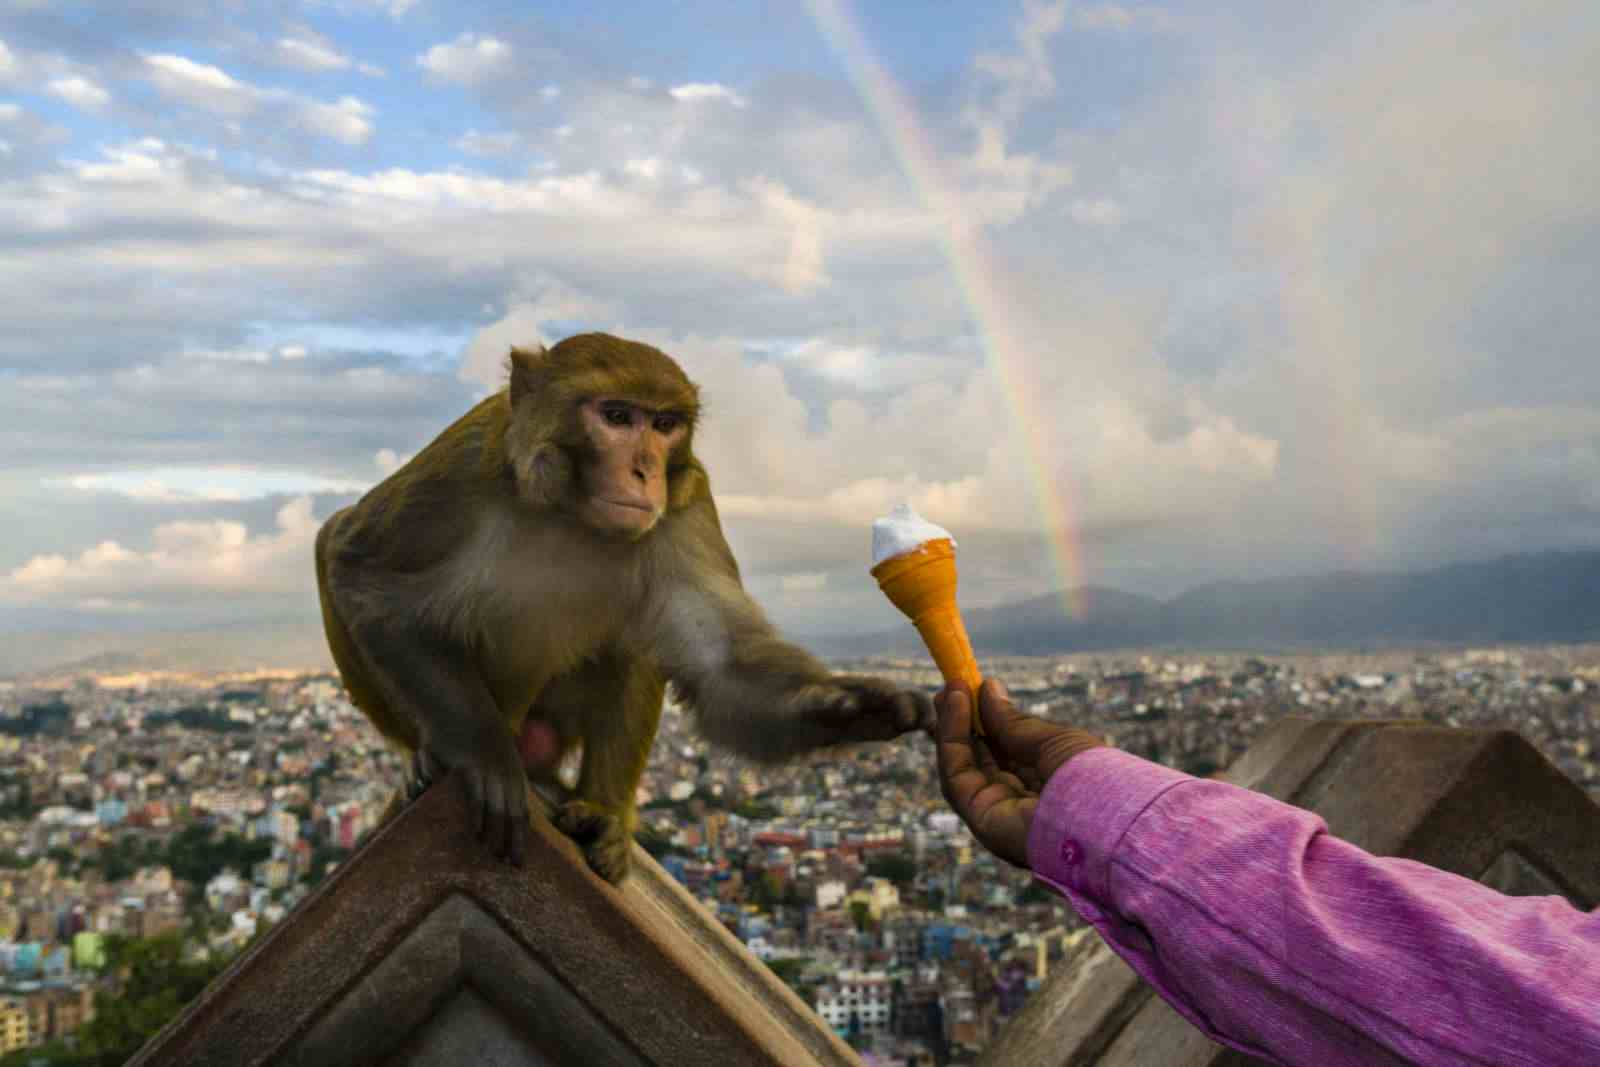 A monkey, rhesus macaque, is sitting on a wall at Swayambhunath temple in Kathmandu, Nepal, reaching out for an ice cream (Frank Bienewald/LightRocket via Getty Images)